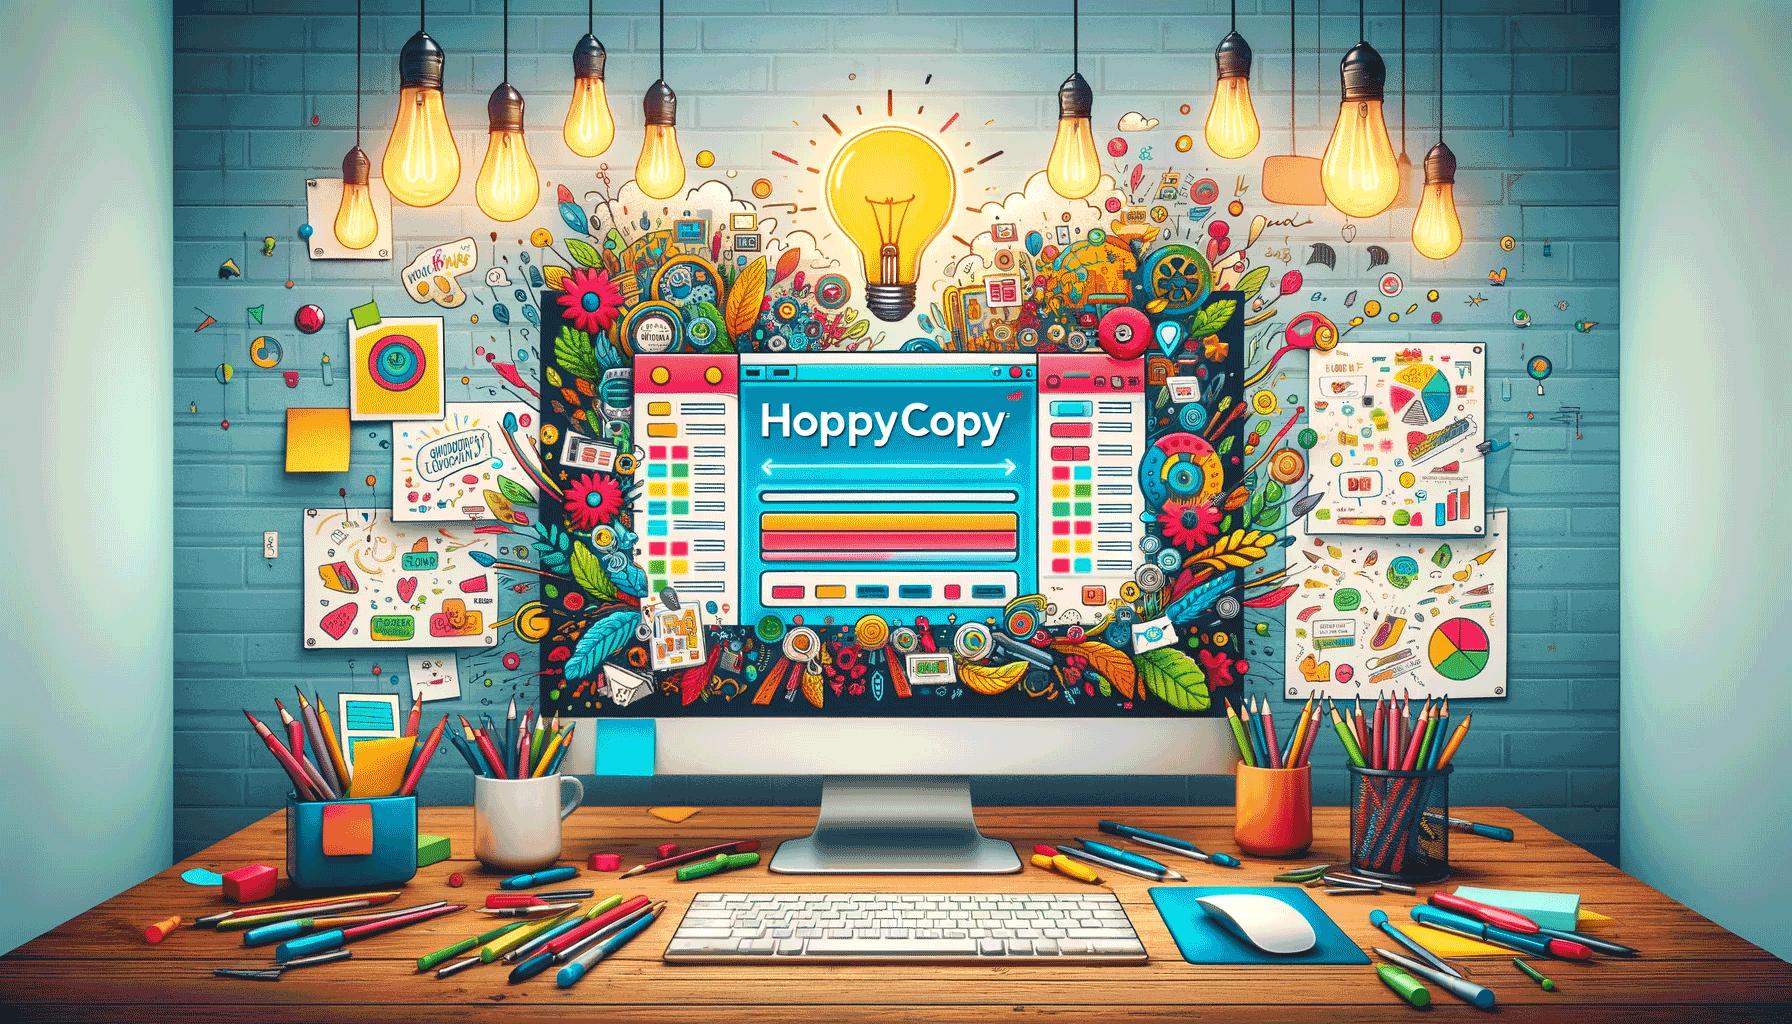 Image that brings to life HoppyCopy's role in creative copywriting, depicting a workspace filled with elements of inspiration and creativity